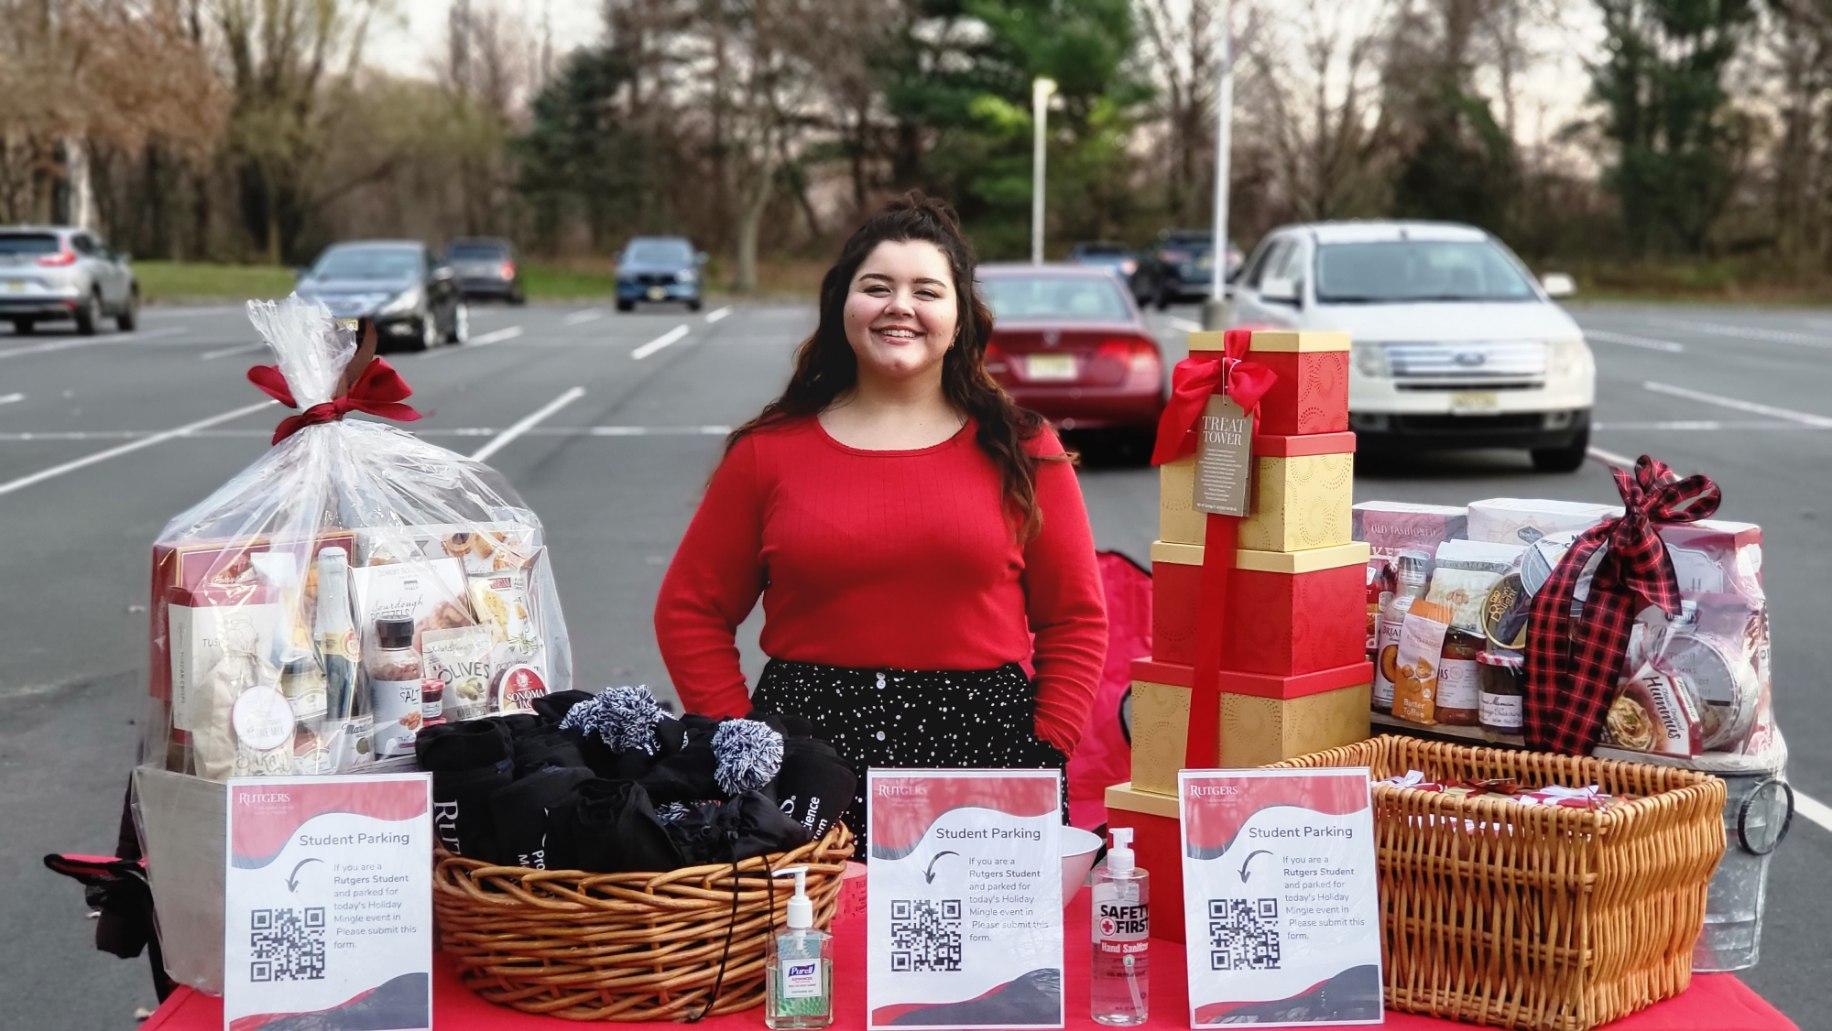 woman in red top and black skirt standing behind table of raffle baskets and gifts